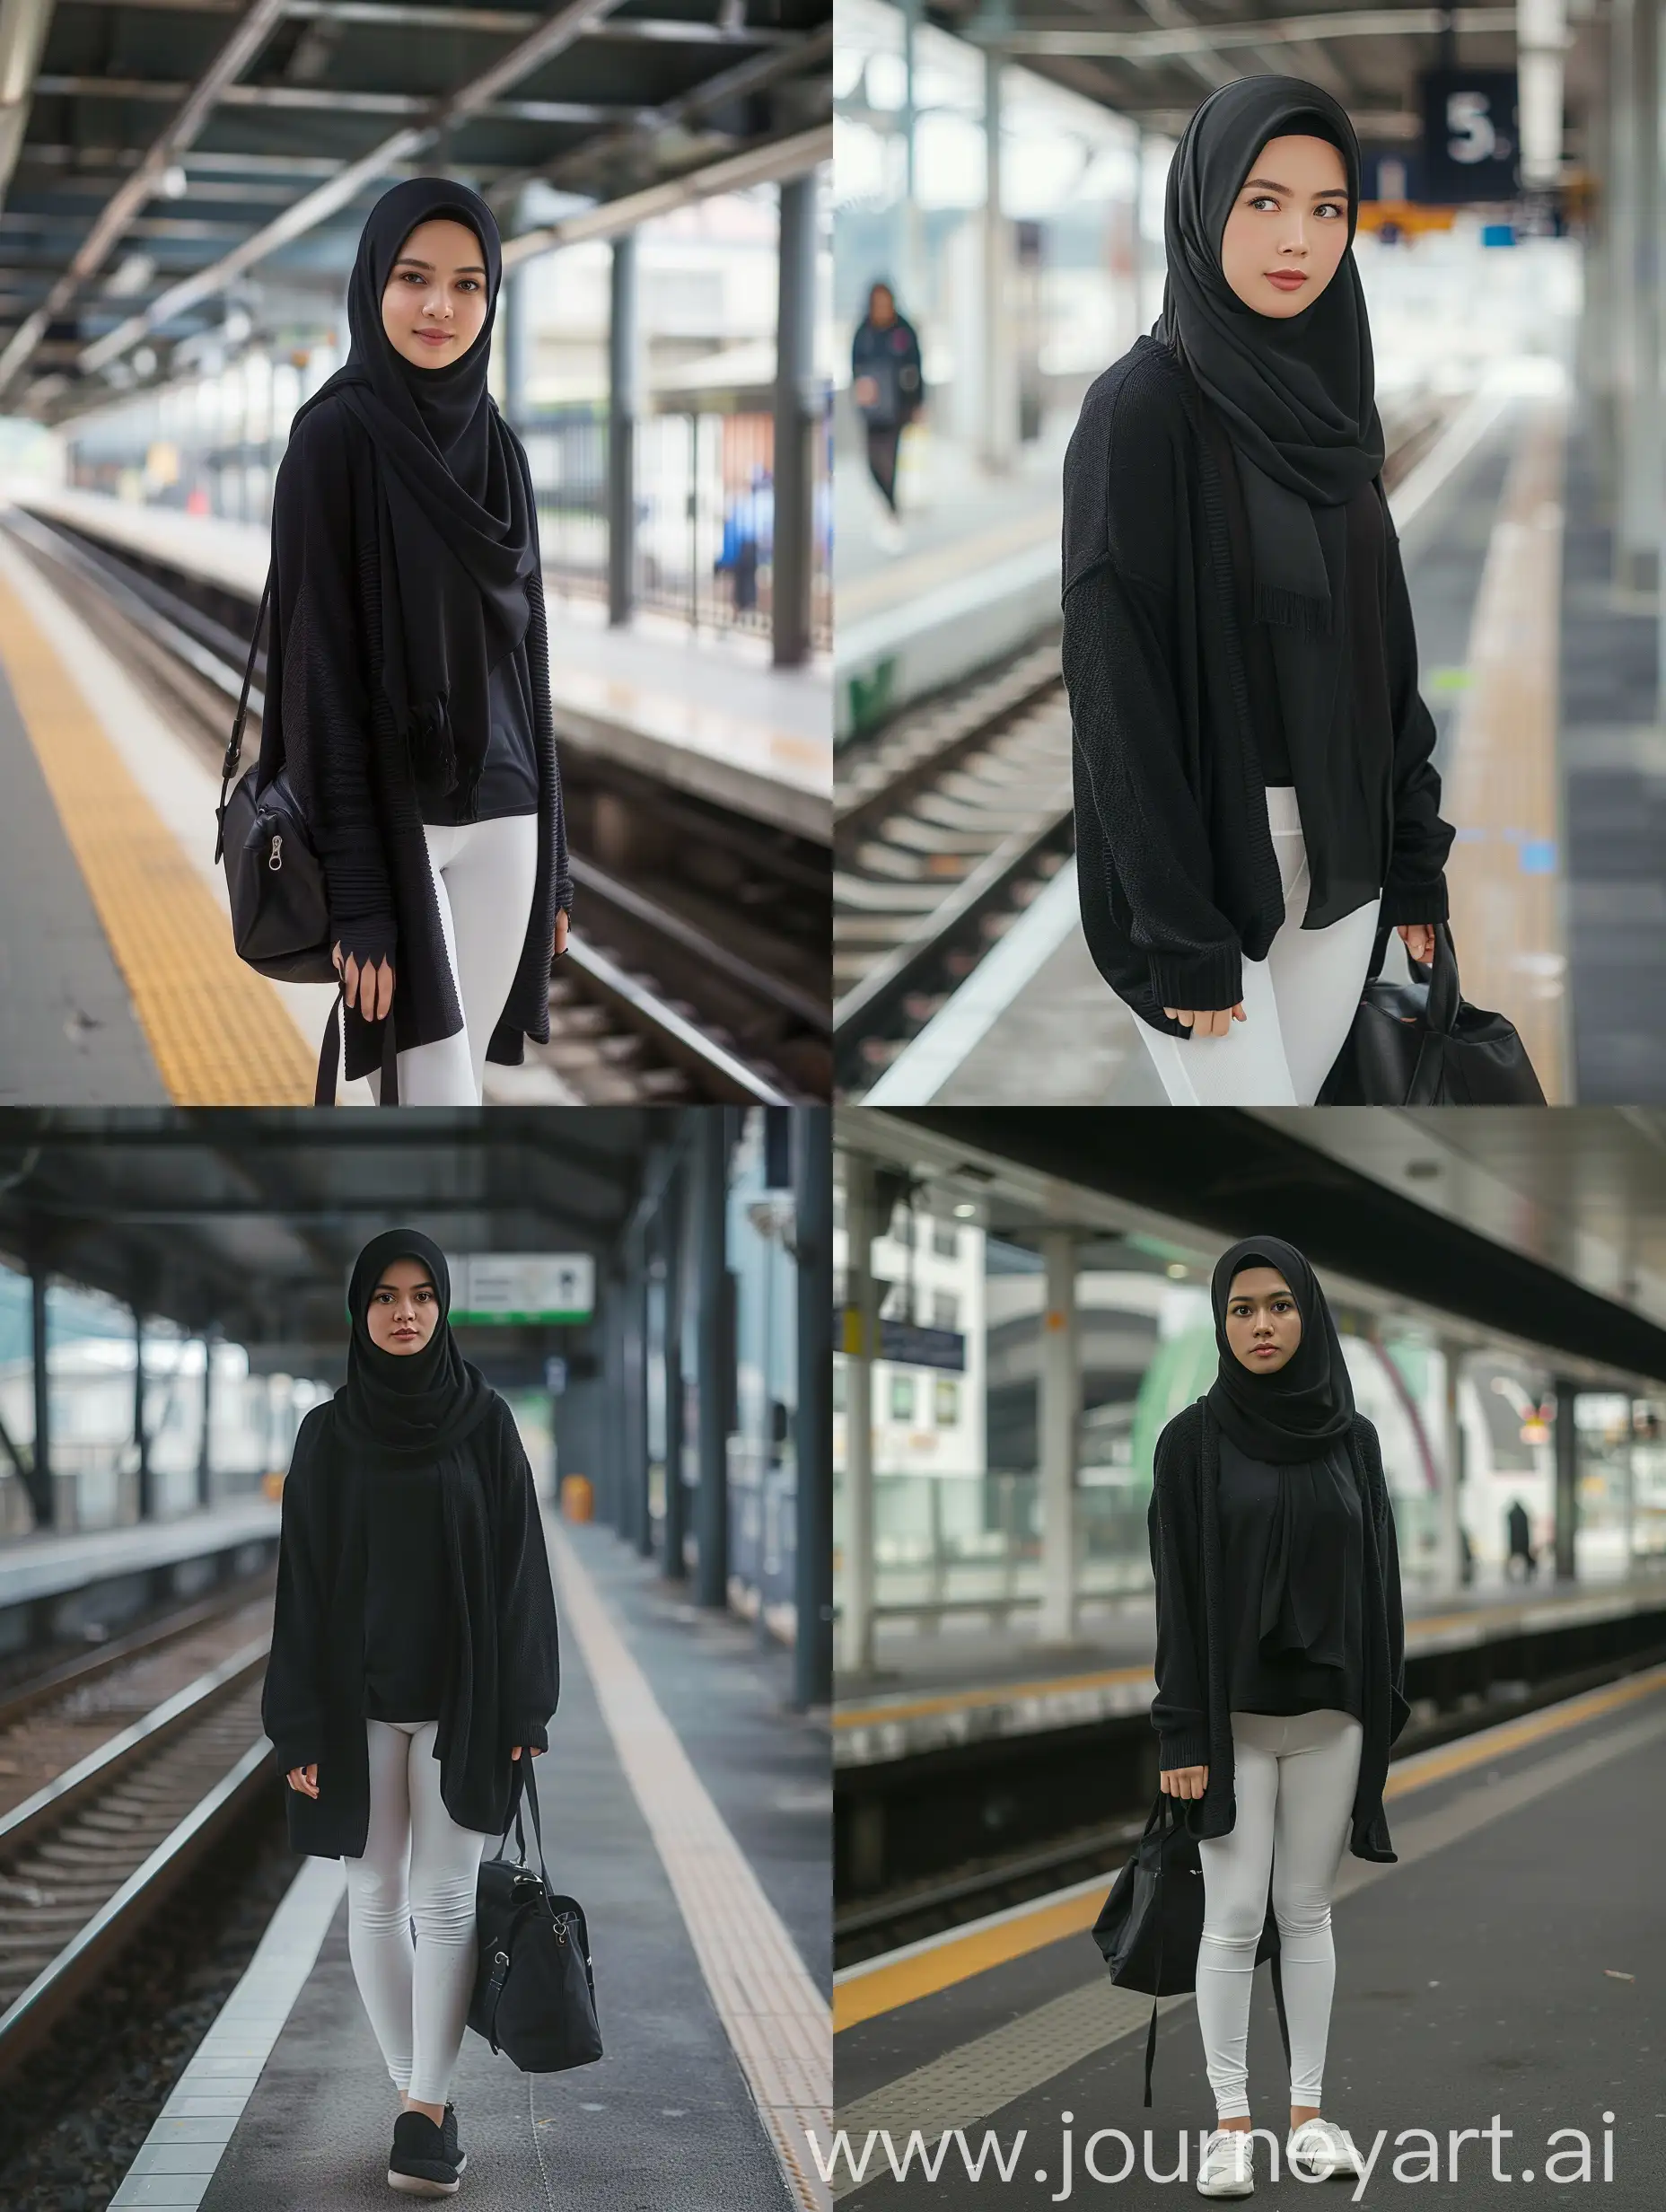 Portrait of an Indonesian woman wearing a black hijab, wearing a black cardigan, and wearing white leggings and a black bag. Standing at the train station. facing the camera